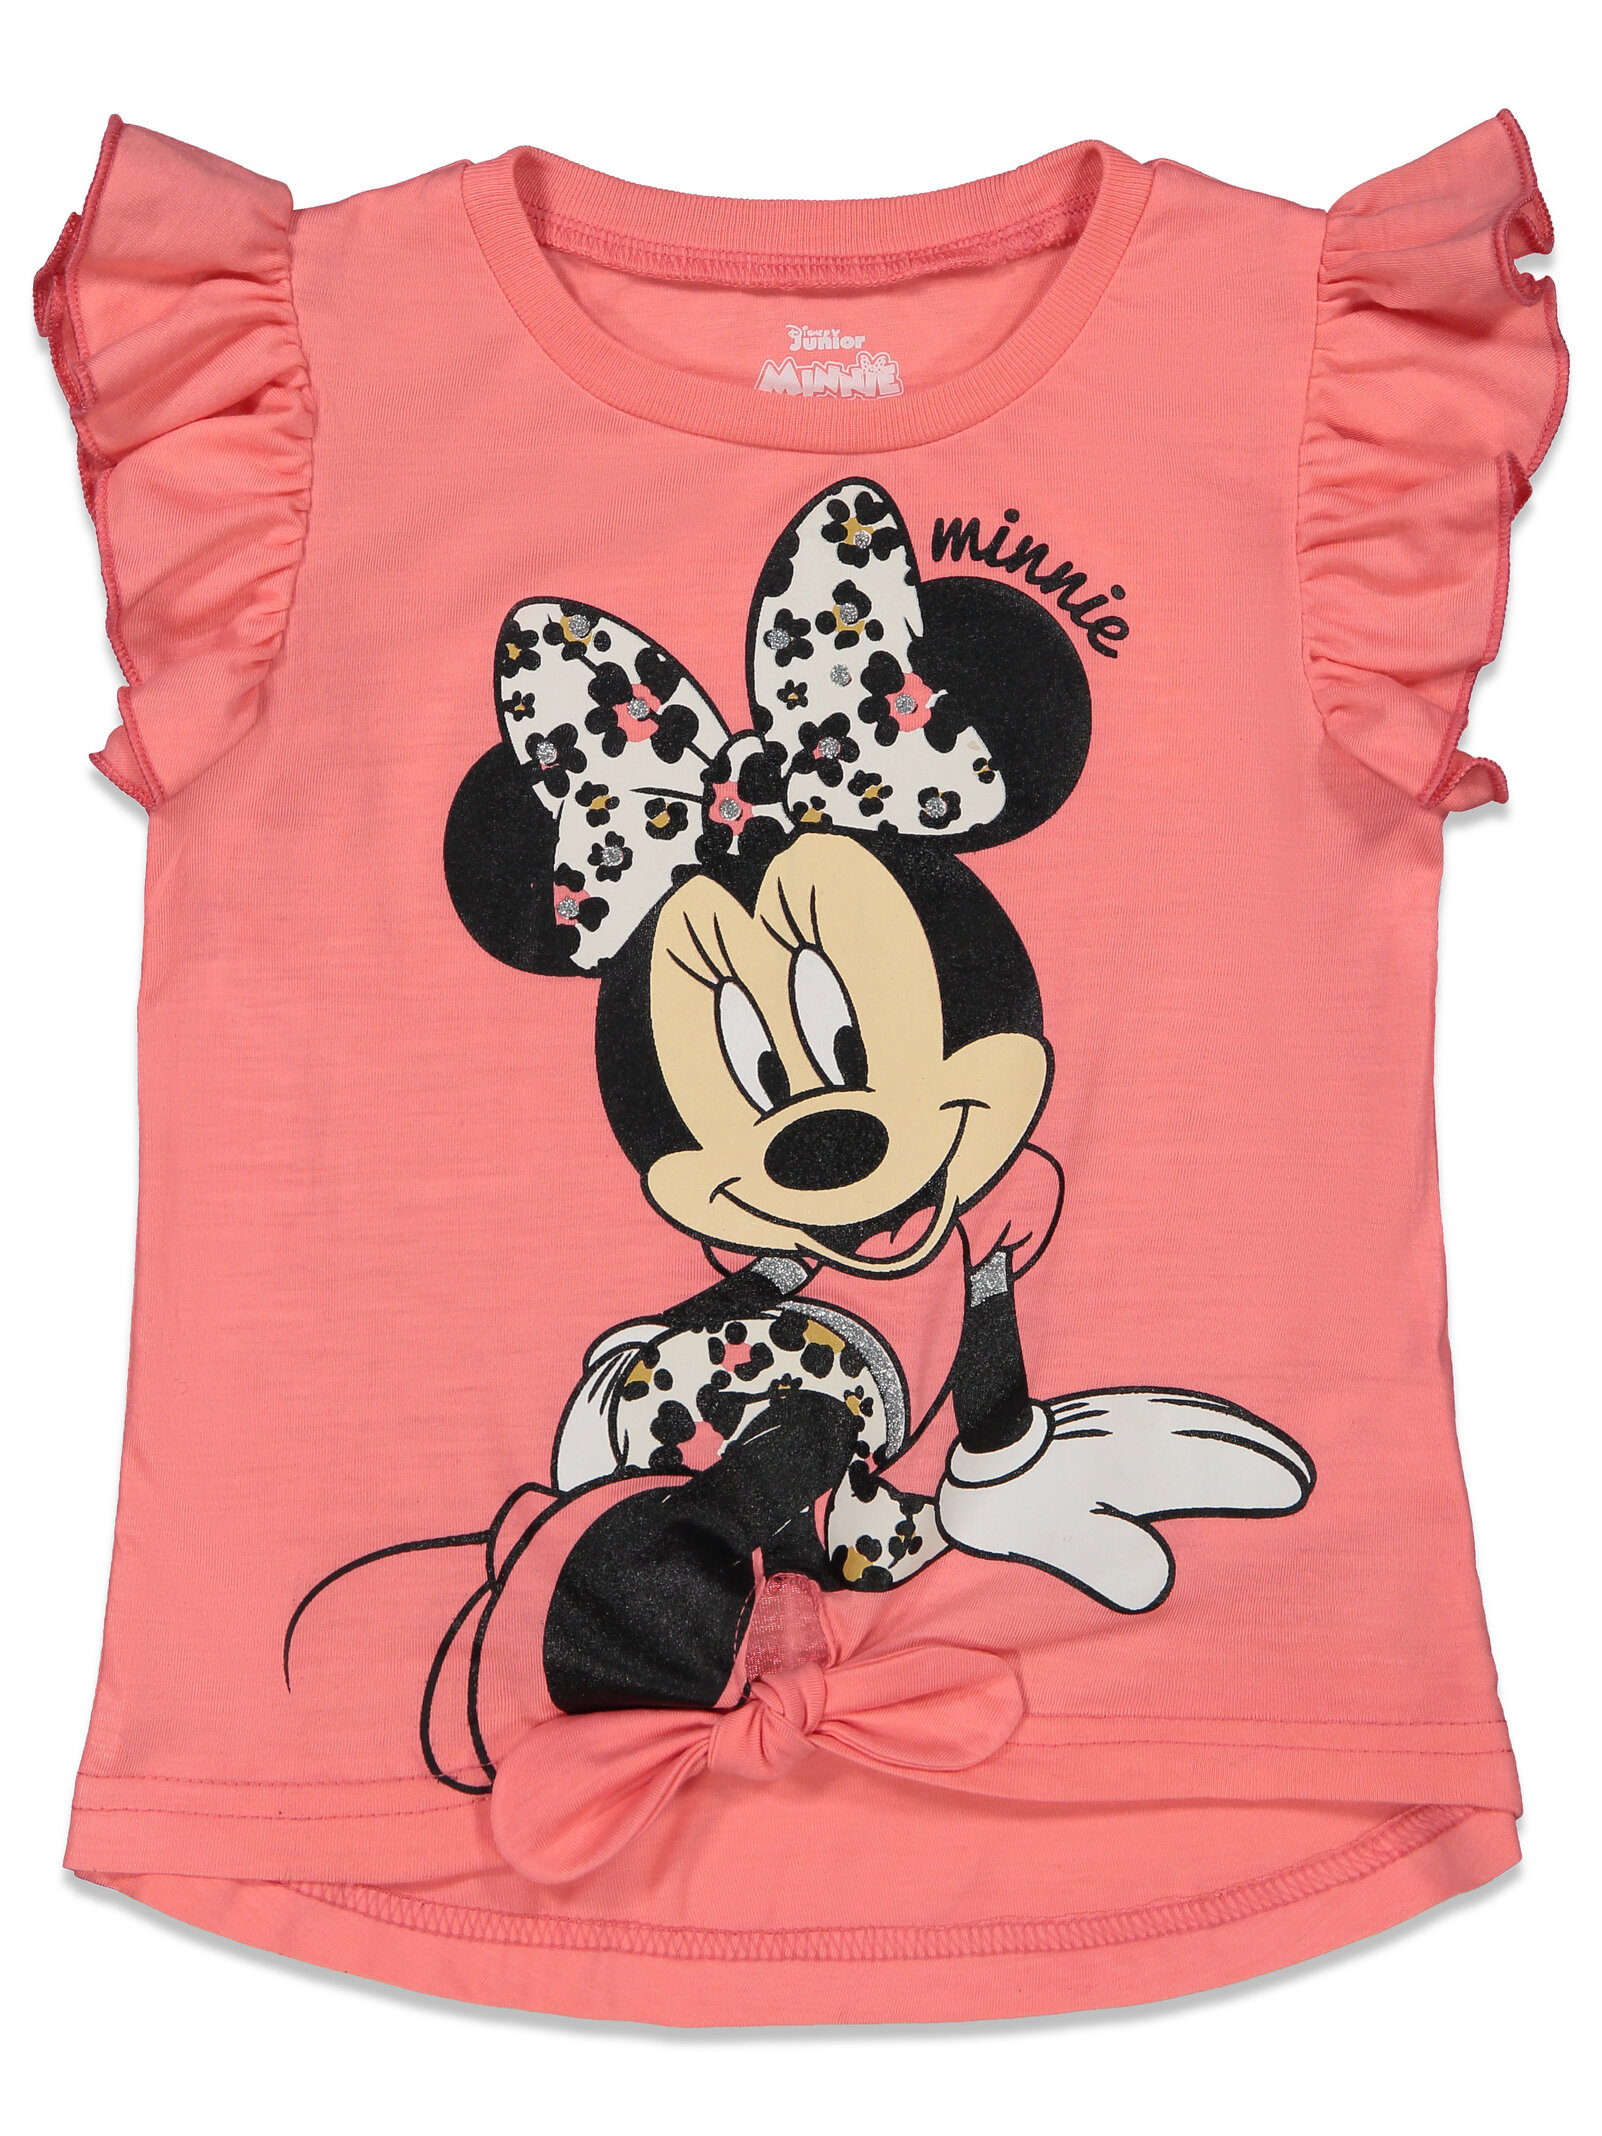 Disney Minnie Mouse Mickey Mouse T-Shirt Dress and Leggings Outfit Set Infant to Big Kid - image 2 of 5